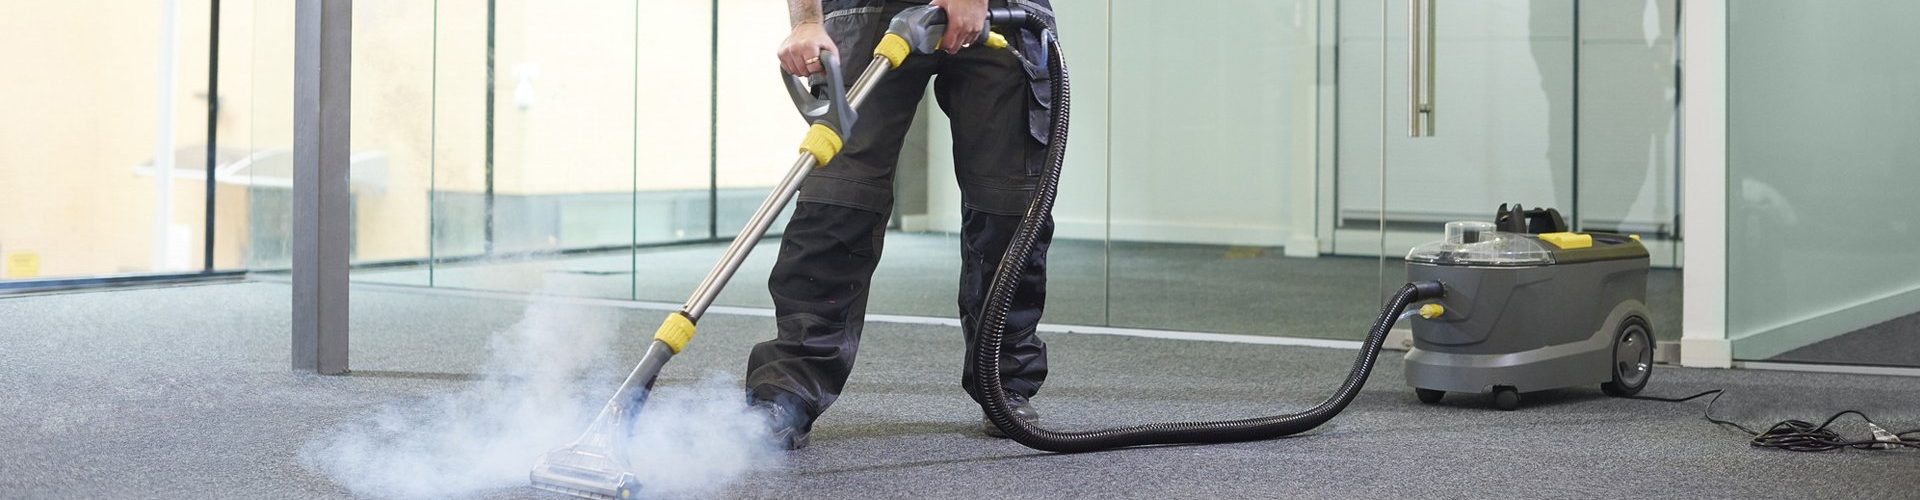 Is Carpet Cleaning worth the money?